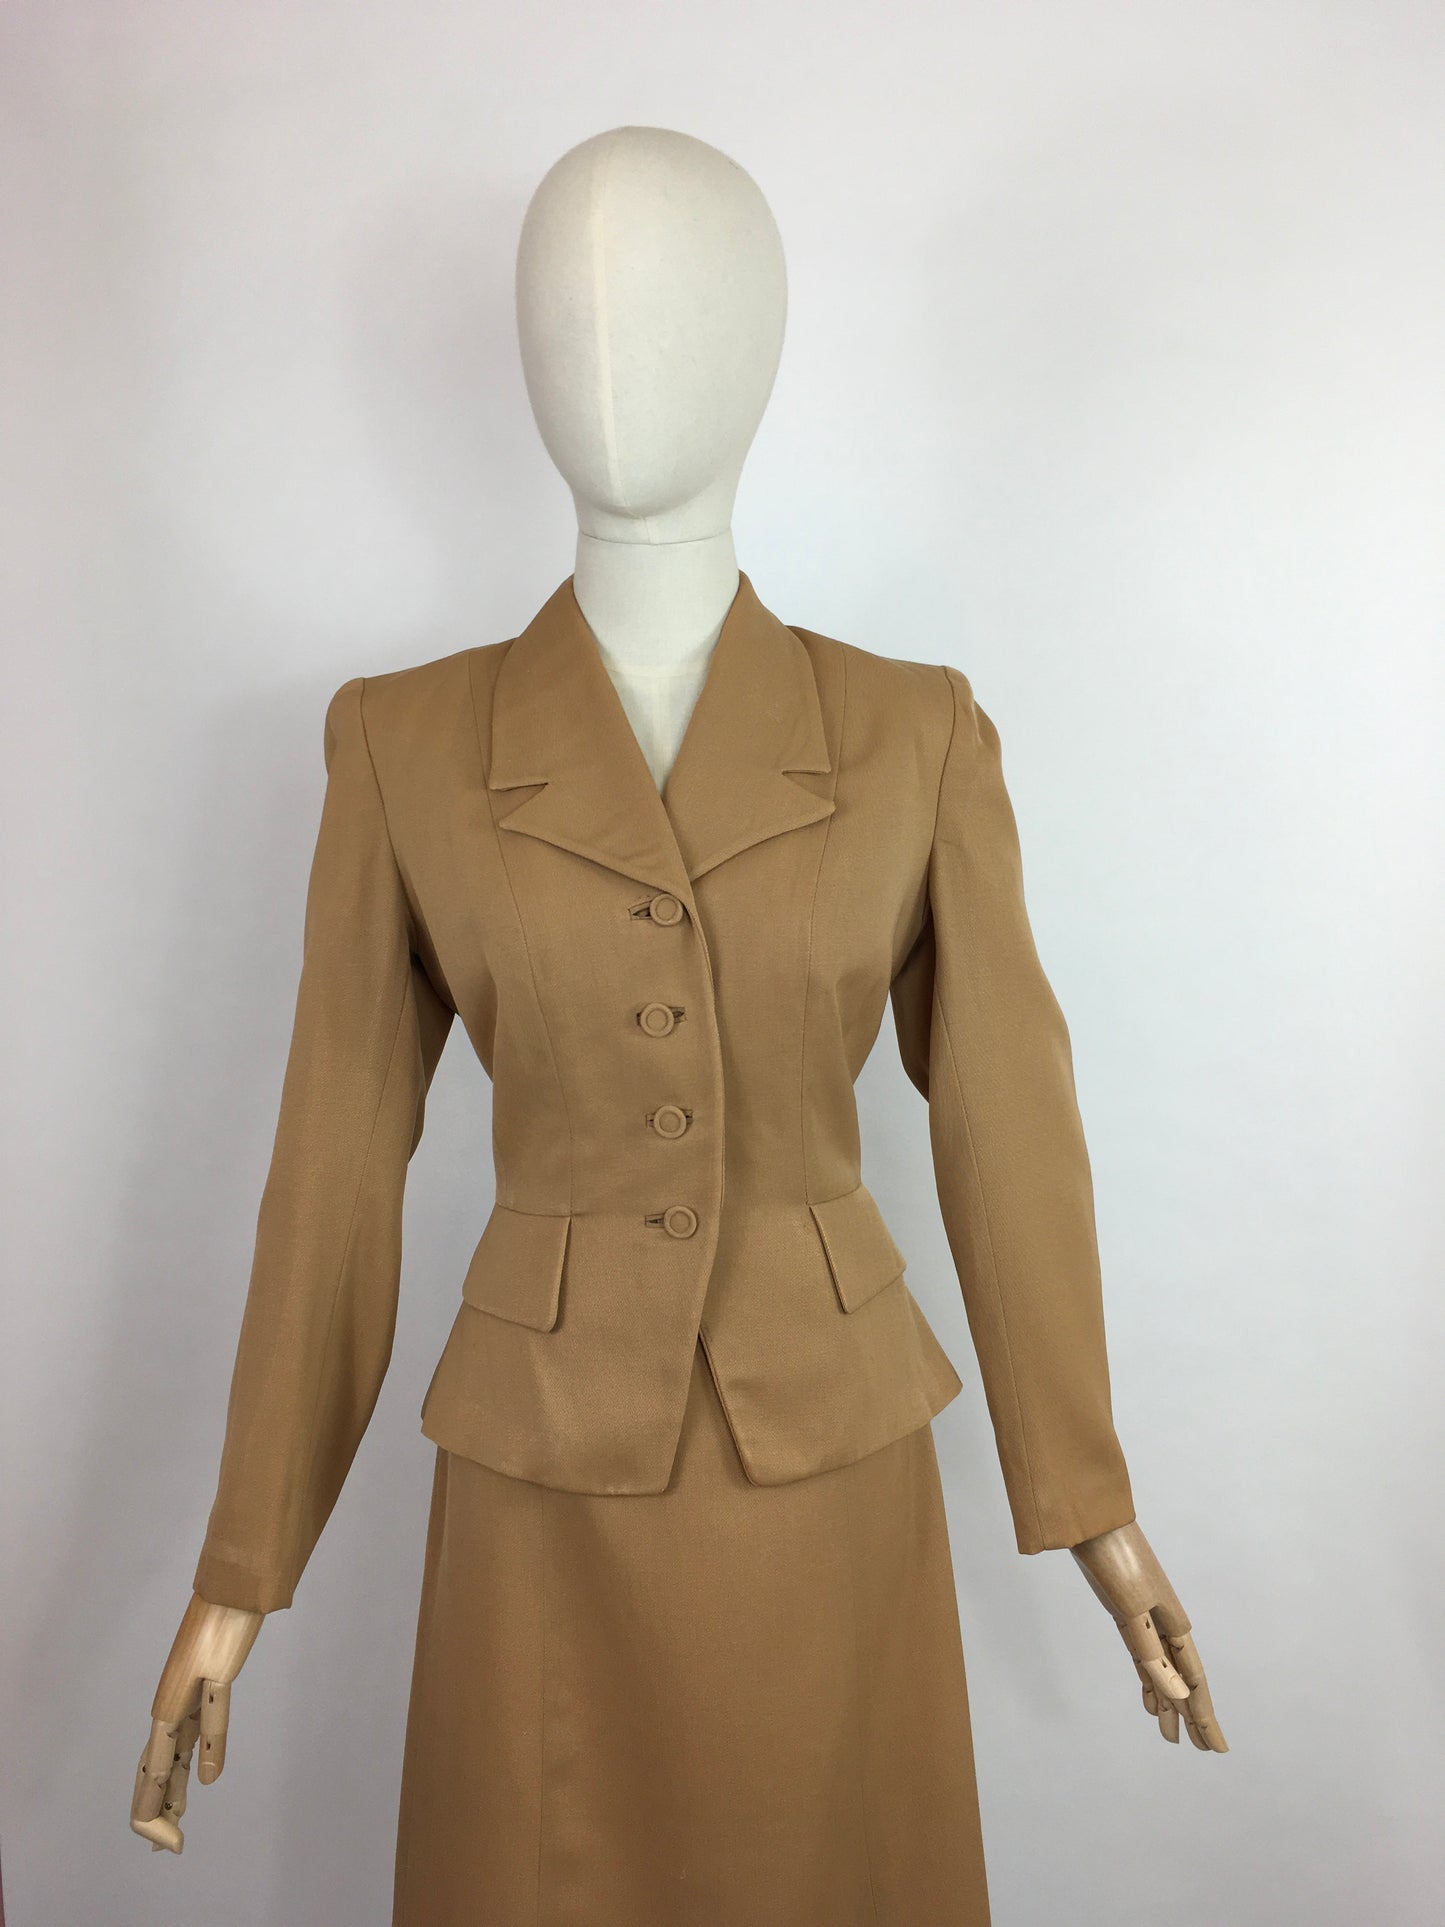 Original 1940’s 2 piece suit In A Lovely Soft Caramel Garbadine - With Amazing Arrow and Button Detailing